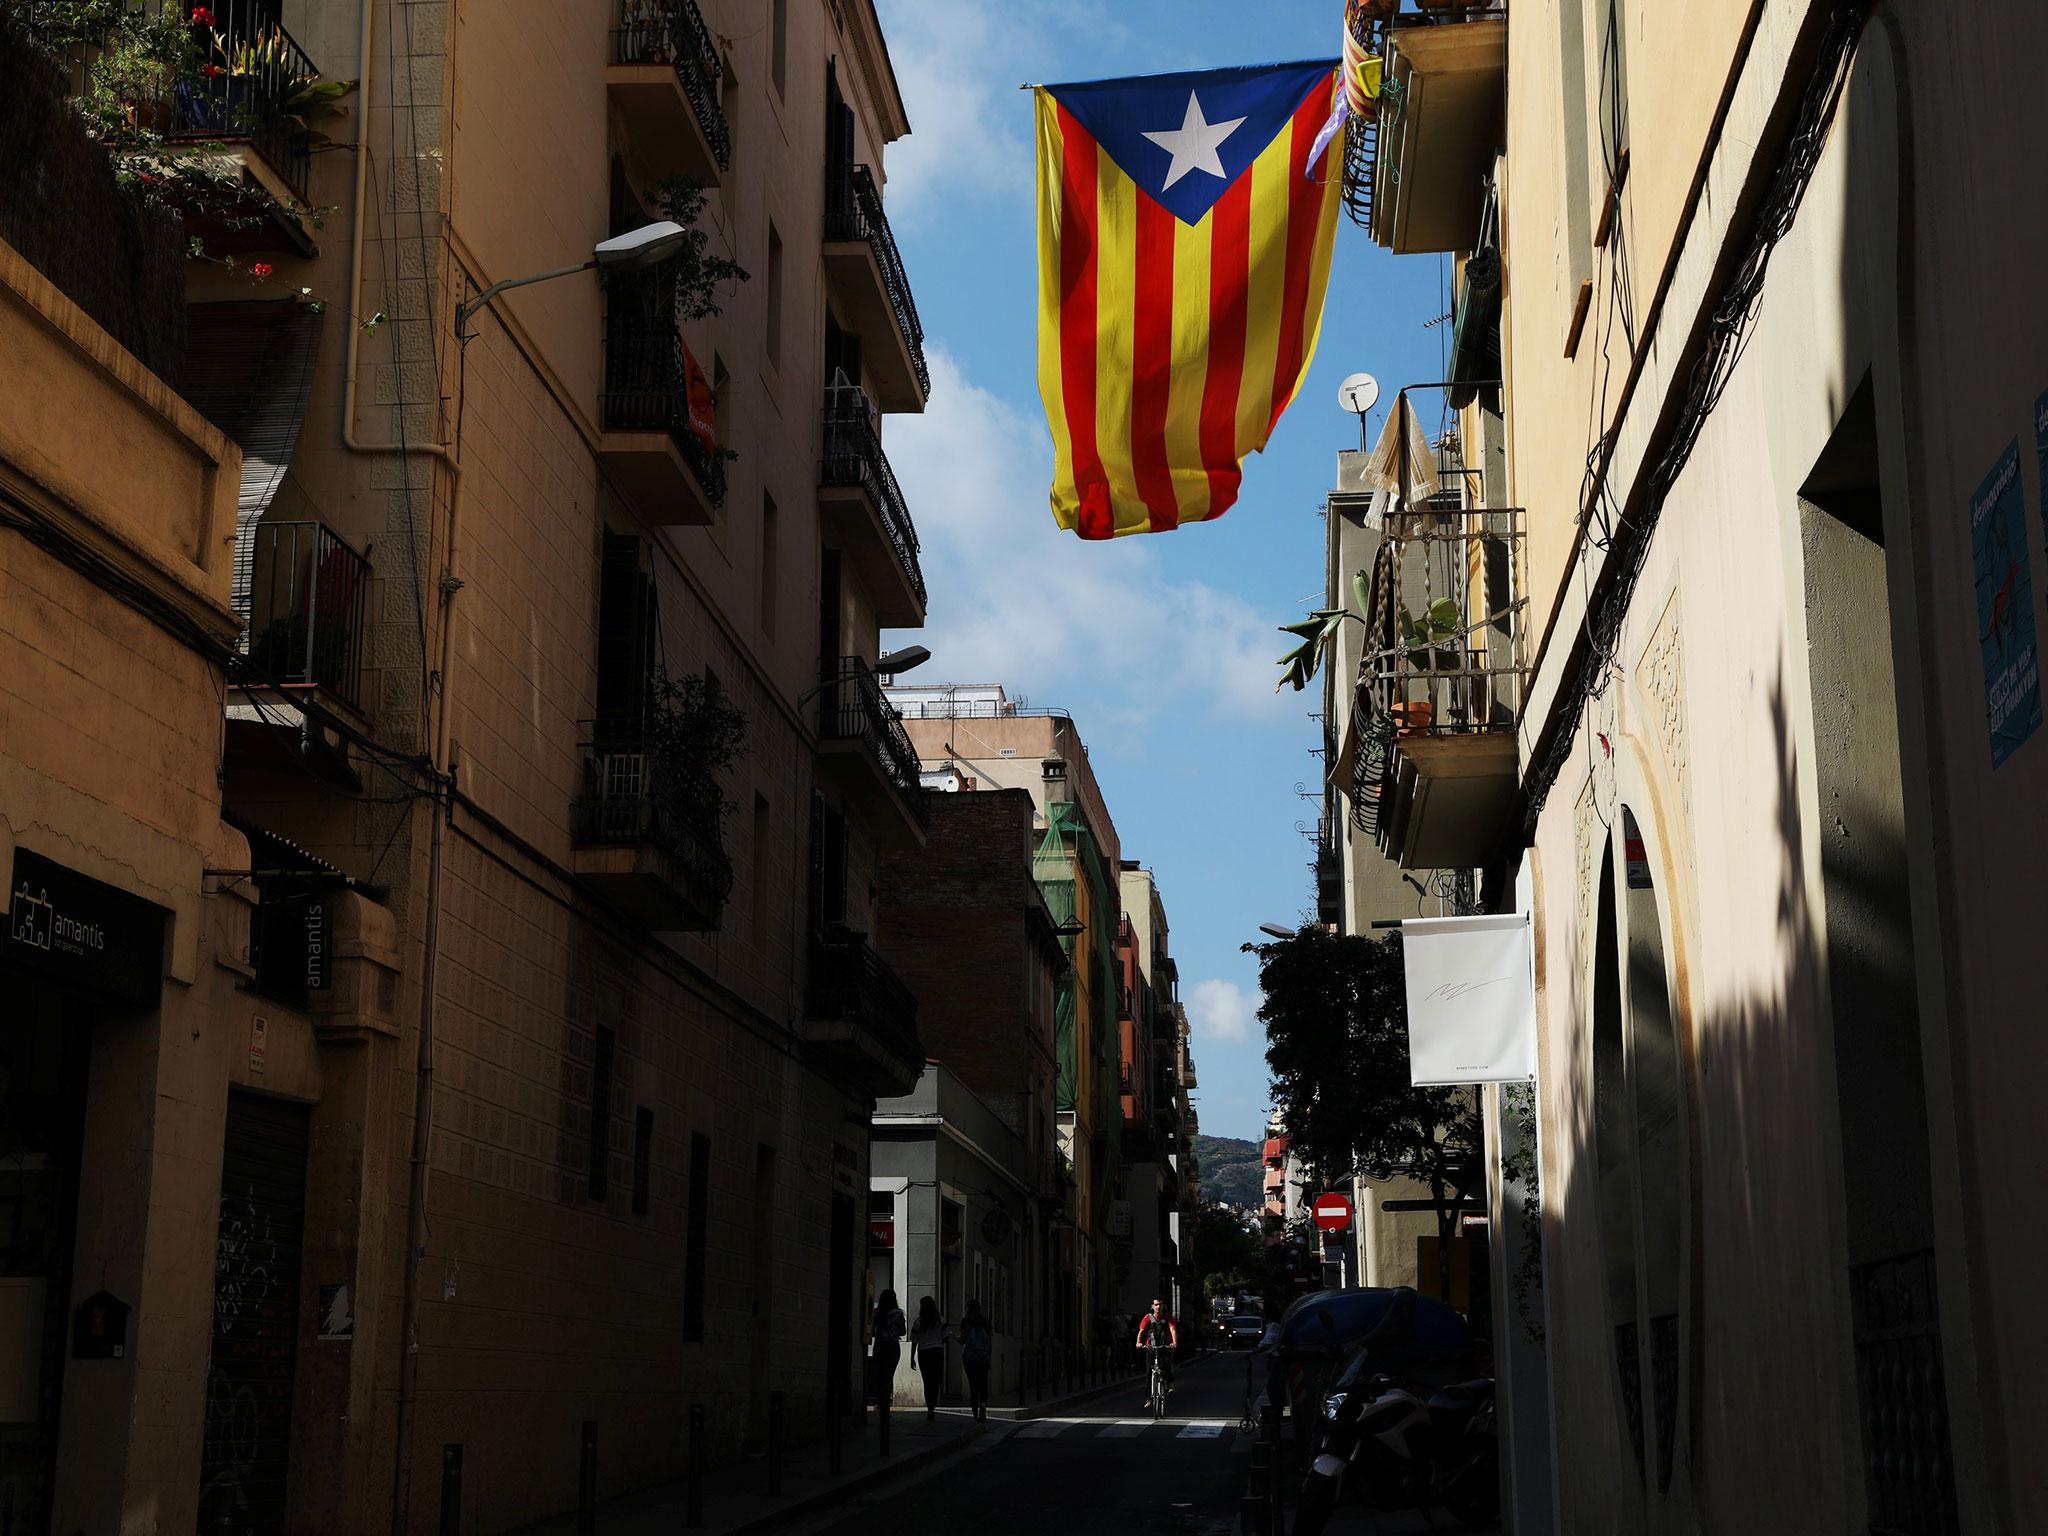 A Catalan separatist flag hangs from a balcony in Barcelona